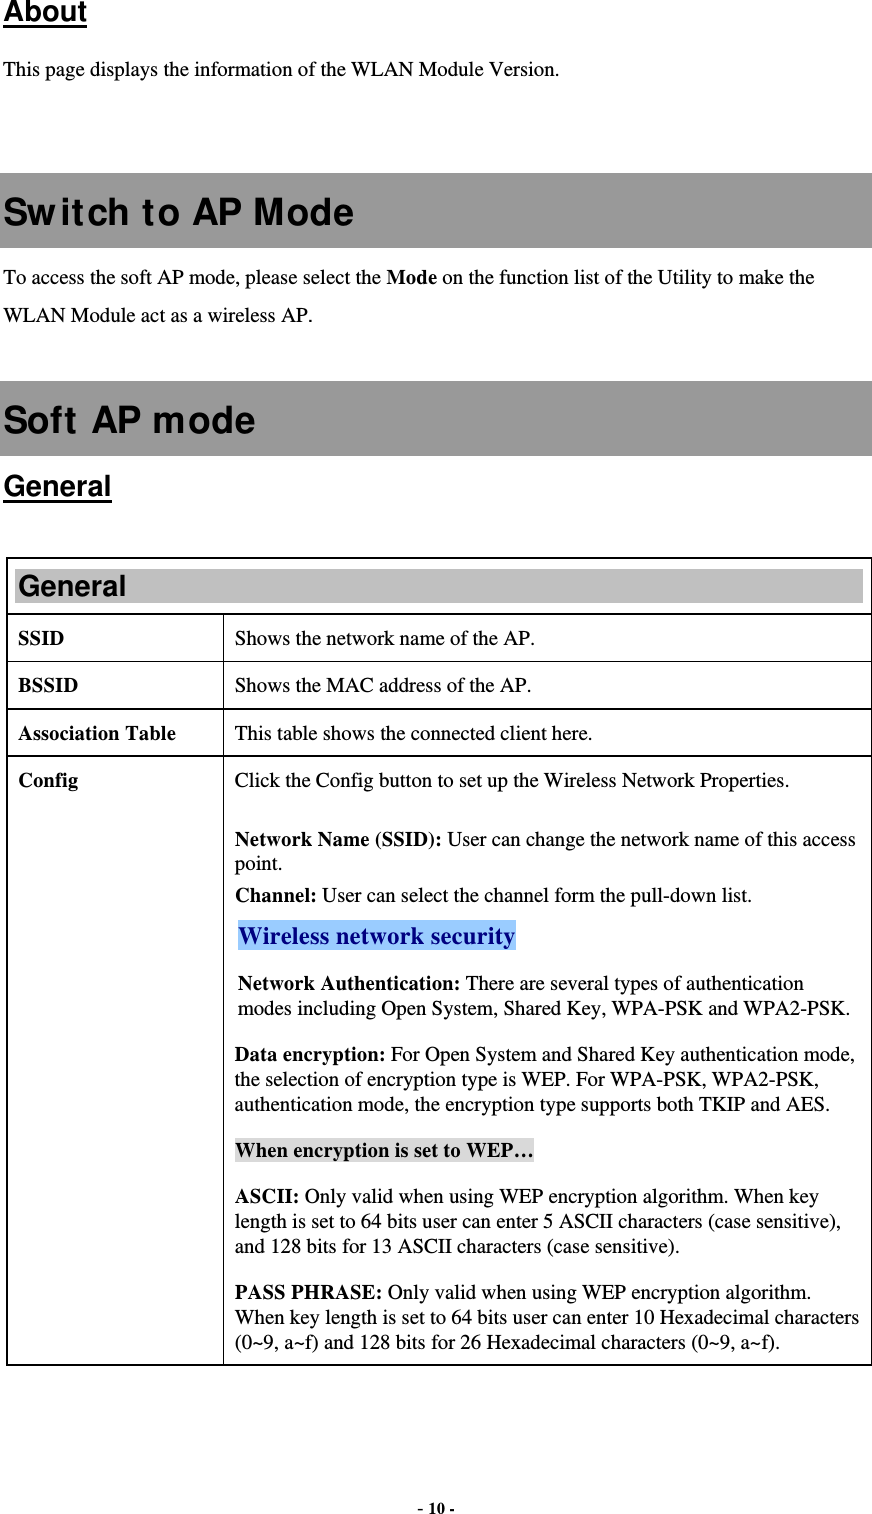  - 10 -  About This page displays the information of the WLAN Module Version.   Switch to AP Mode To access the soft AP mode, please select the Mode on the function list of the Utility to make the WLAN Module act as a wireless AP.  Soft AP mode General  General SSID   Shows the network name of the AP. BSSID  Shows the MAC address of the AP. Association Table  This table shows the connected client here. Config  Click the Config button to set up the Wireless Network Properties.  Network Name (SSID): User can change the network name of this access point. Channel: User can select the channel form the pull-down list. Wireless network security Network Authentication: There are several types of authentication modes including Open System, Shared Key, WPA-PSK and WPA2-PSK. Data encryption: For Open System and Shared Key authentication mode, the selection of encryption type is WEP. For WPA-PSK, WPA2-PSK, authentication mode, the encryption type supports both TKIP and AES. When encryption is set to WEP… ASCII: Only valid when using WEP encryption algorithm. When key length is set to 64 bits user can enter 5 ASCII characters (case sensitive), and 128 bits for 13 ASCII characters (case sensitive). PASS PHRASE: Only valid when using WEP encryption algorithm. When key length is set to 64 bits user can enter 10 Hexadecimal characters (0~9, a~f) and 128 bits for 26 Hexadecimal characters (0~9, a~f). 